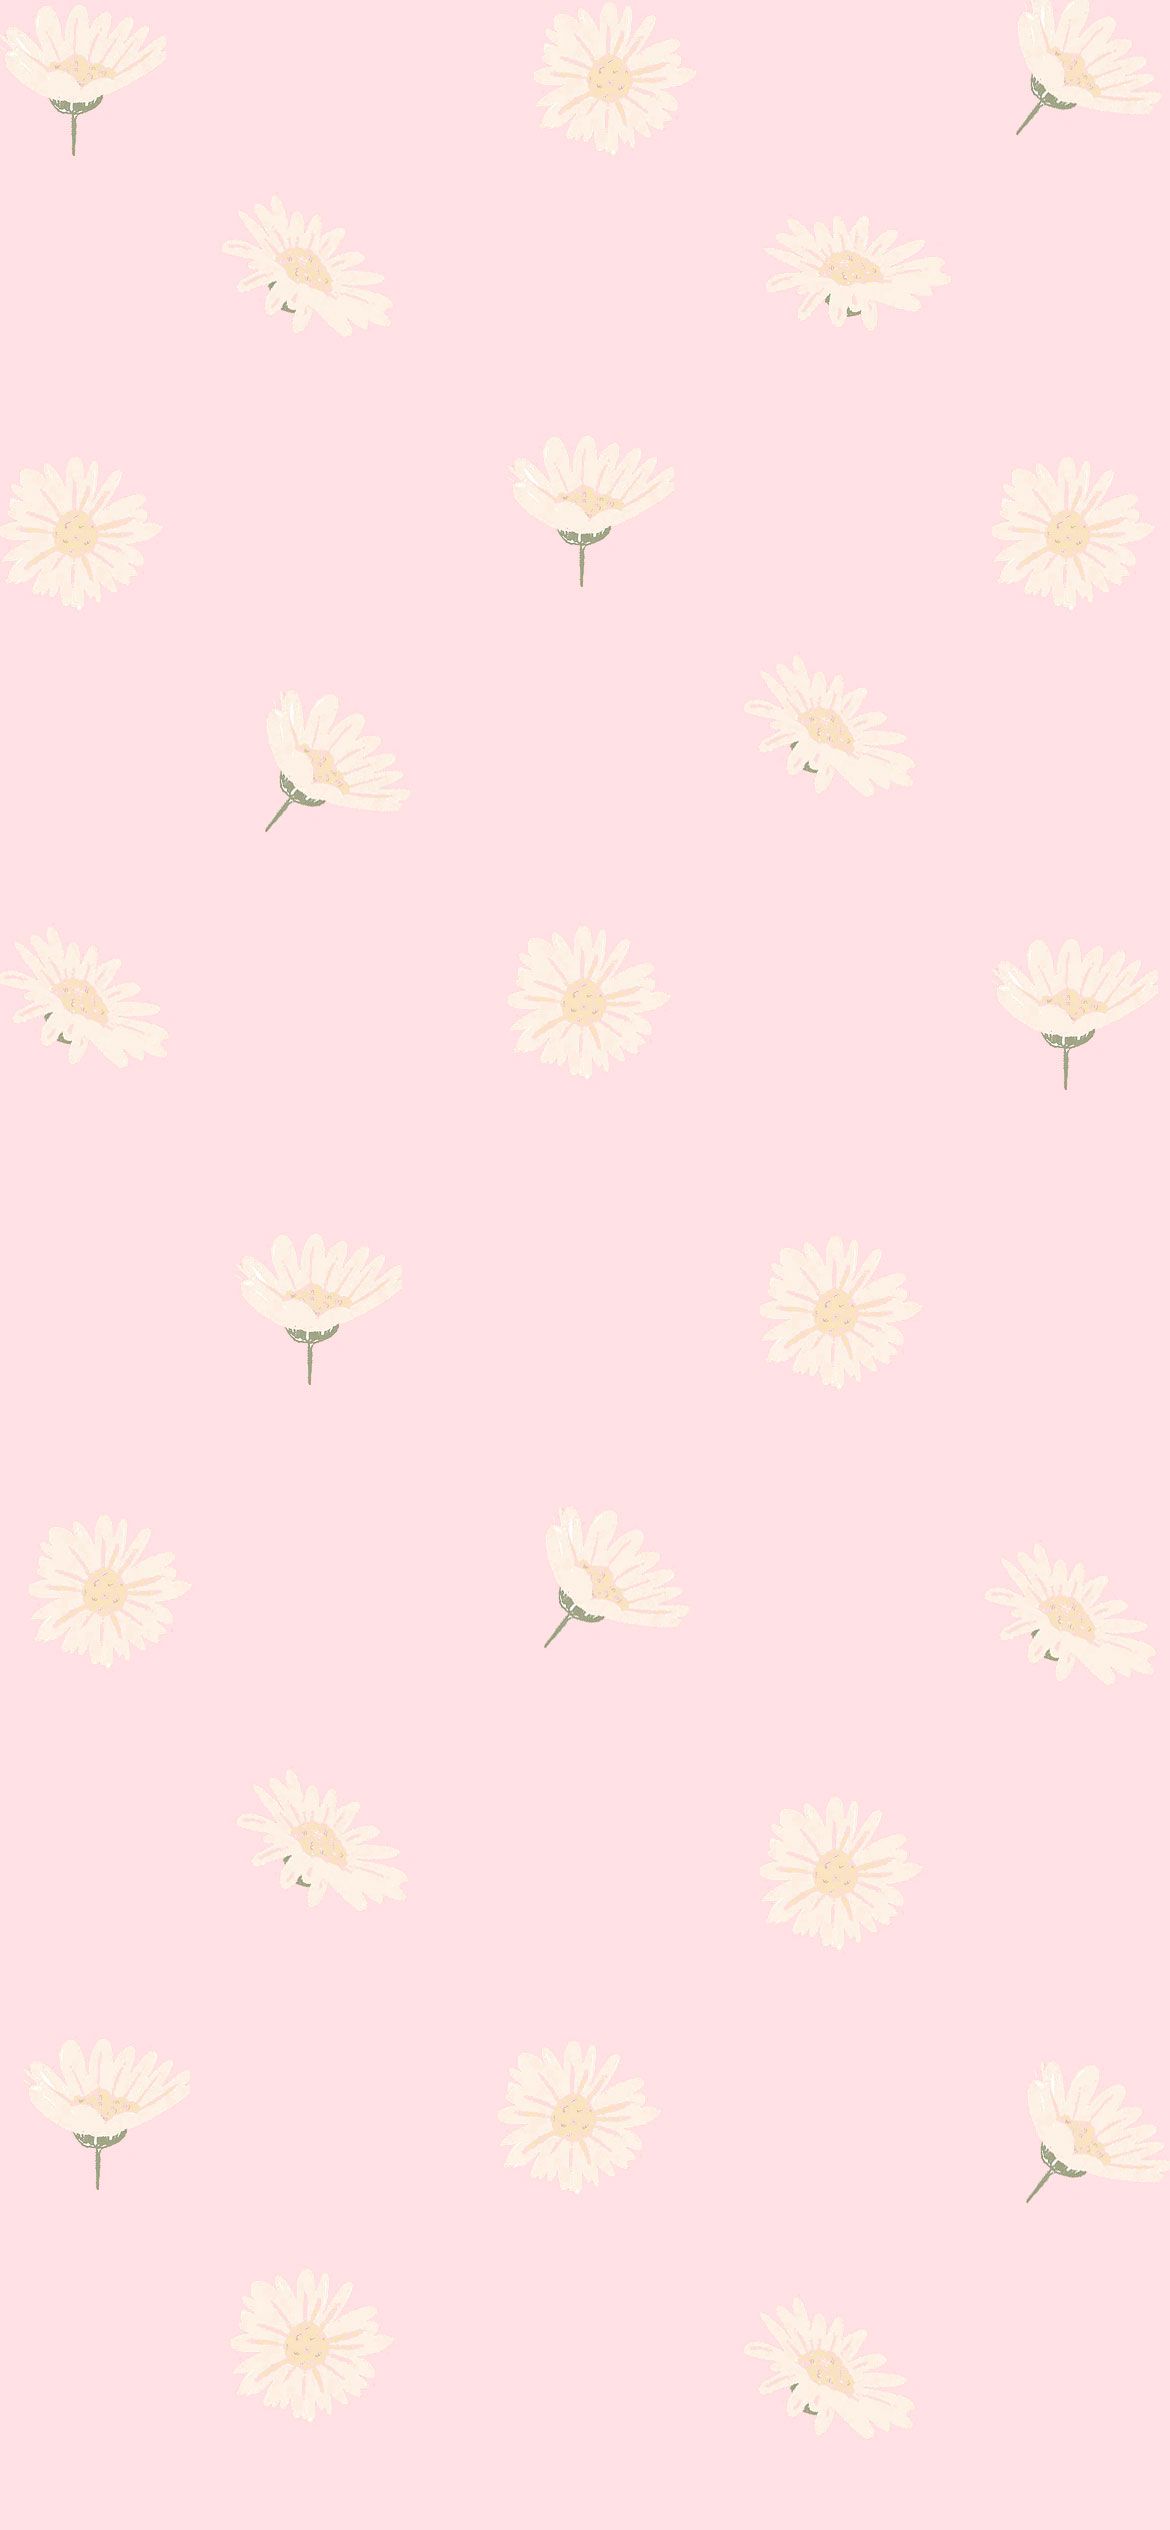 A pattern of white flowers on pink background - Pink, pink phone, pastel pink, cute pink, daisy, pastel rainbow